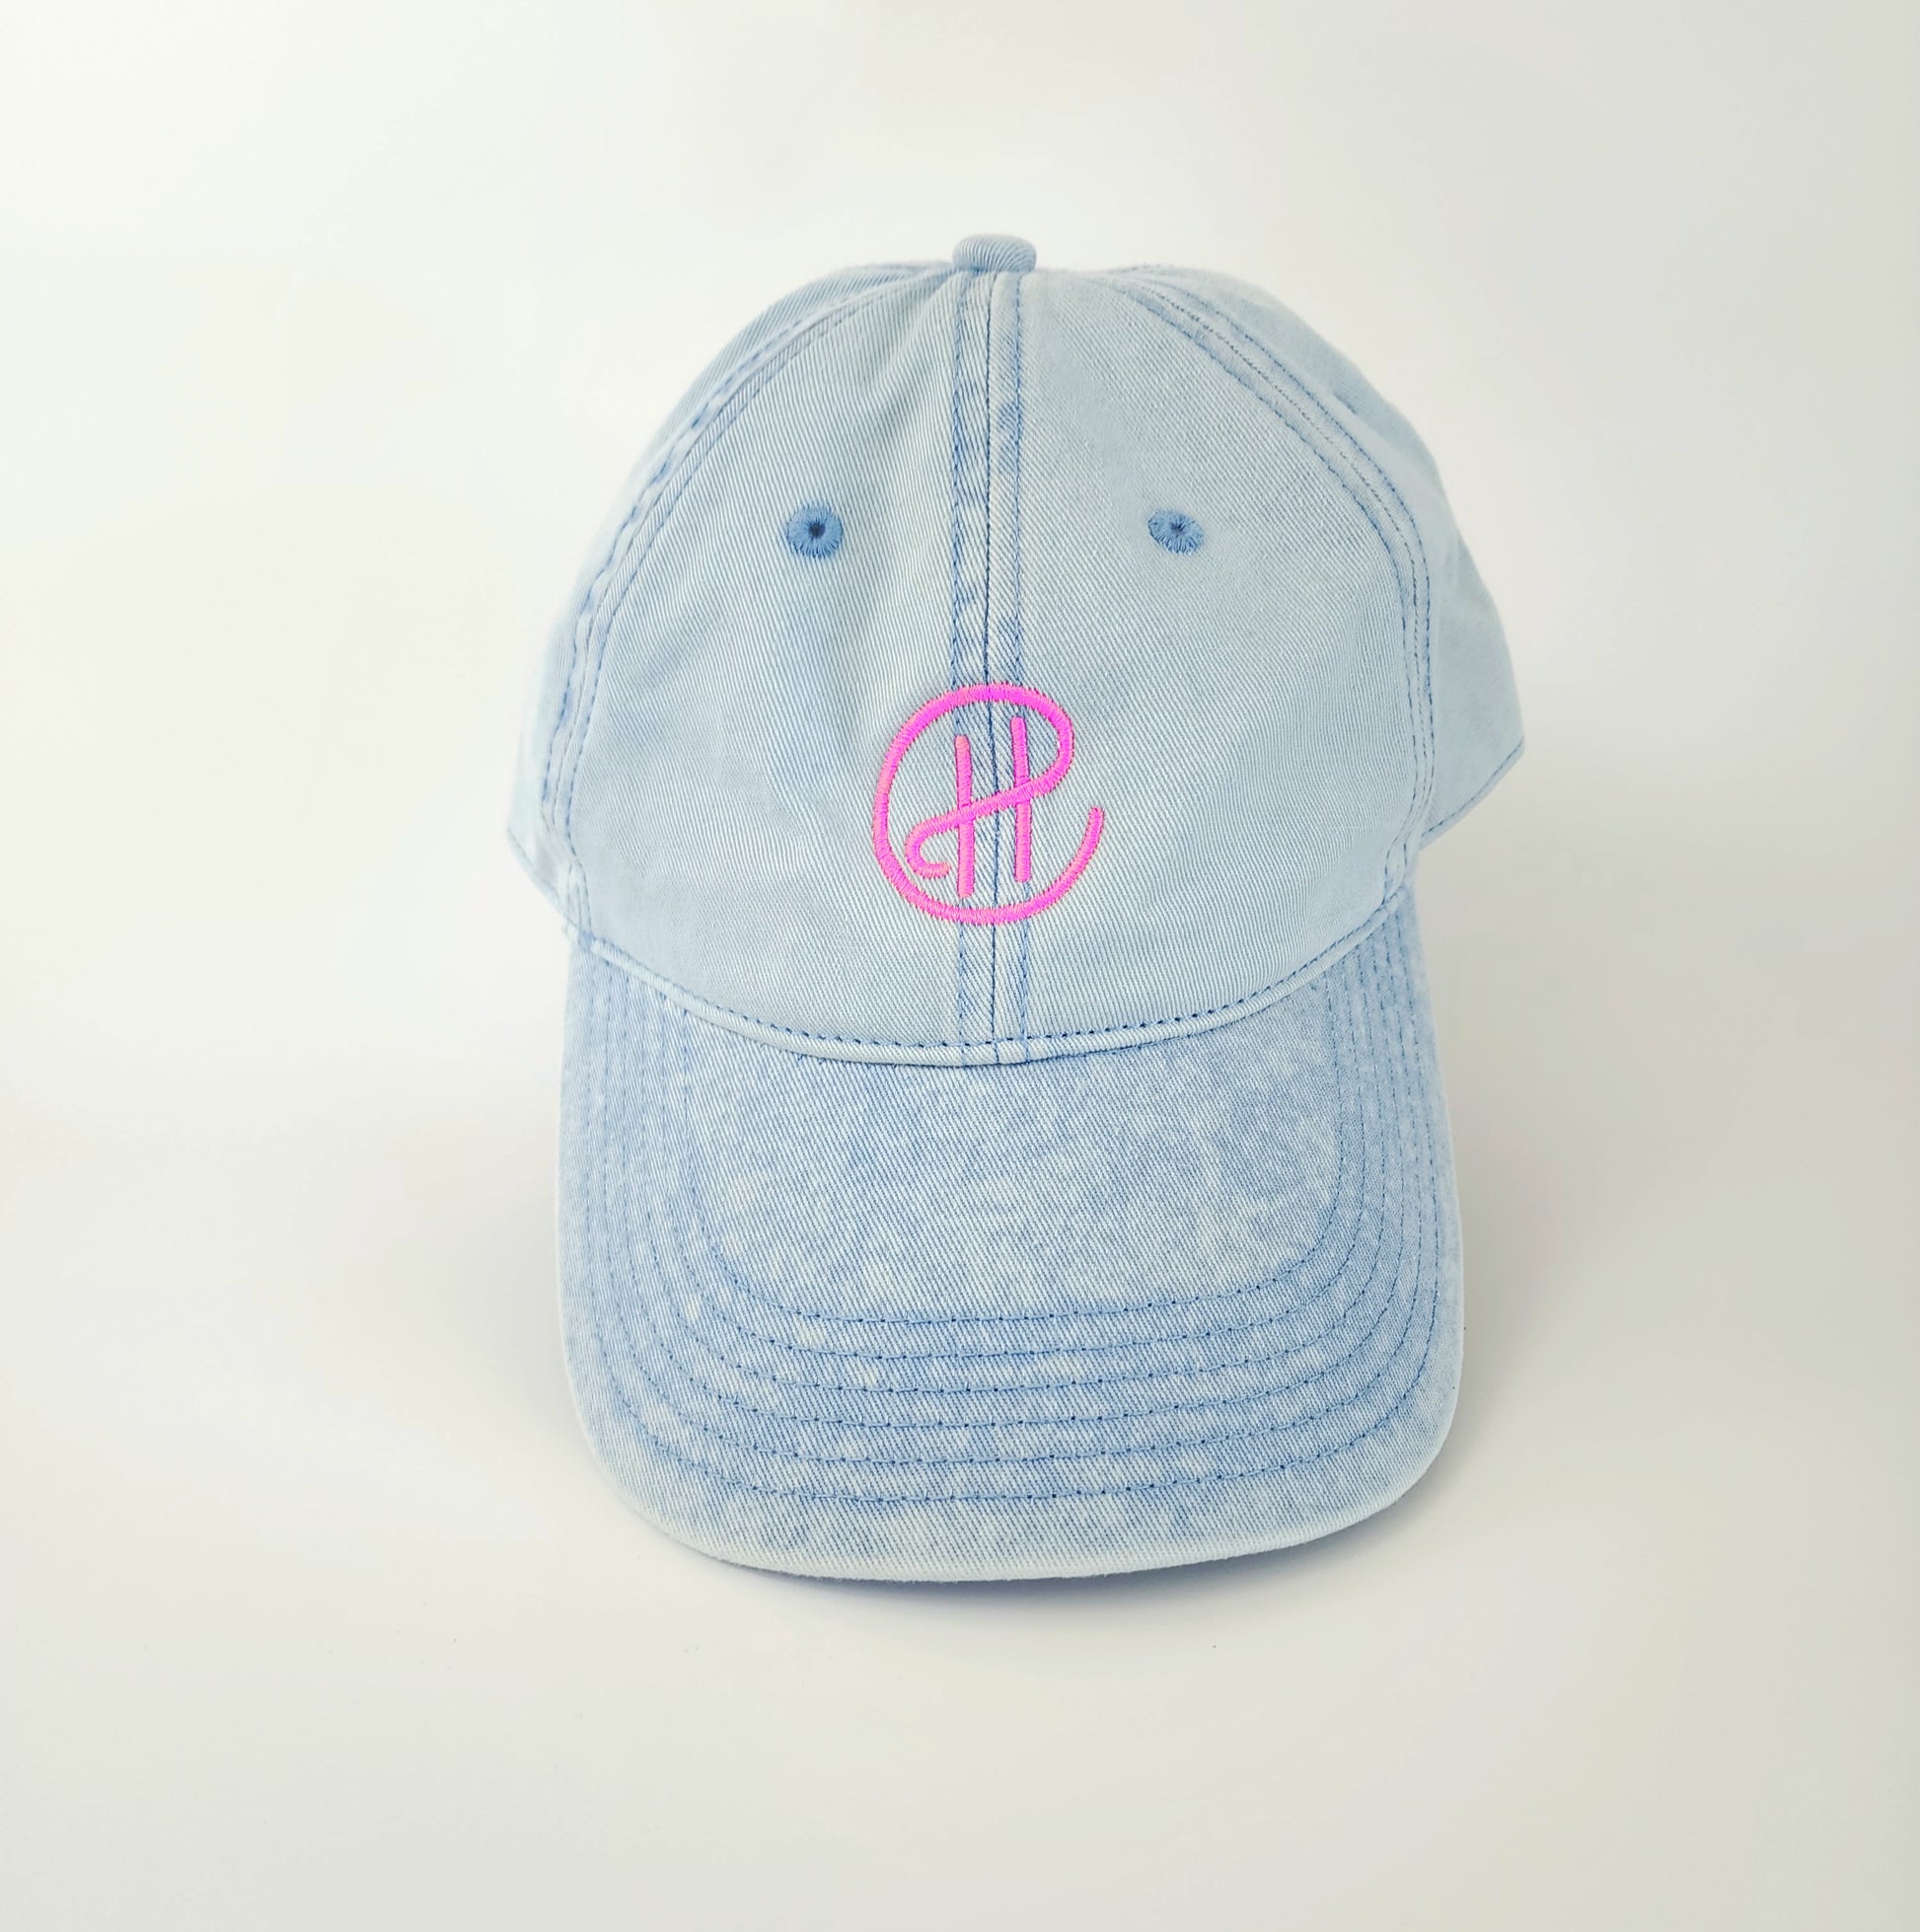 The front of a light-blue denim hat with a neon pink "CH" embroidered in the center. In the CH logo, the center bar of the H connects to the C, which encircles the H. The logo stands out bright against the blue denim. This hat has a ‘90s retro feel contrasted with modern-looking embroidery.